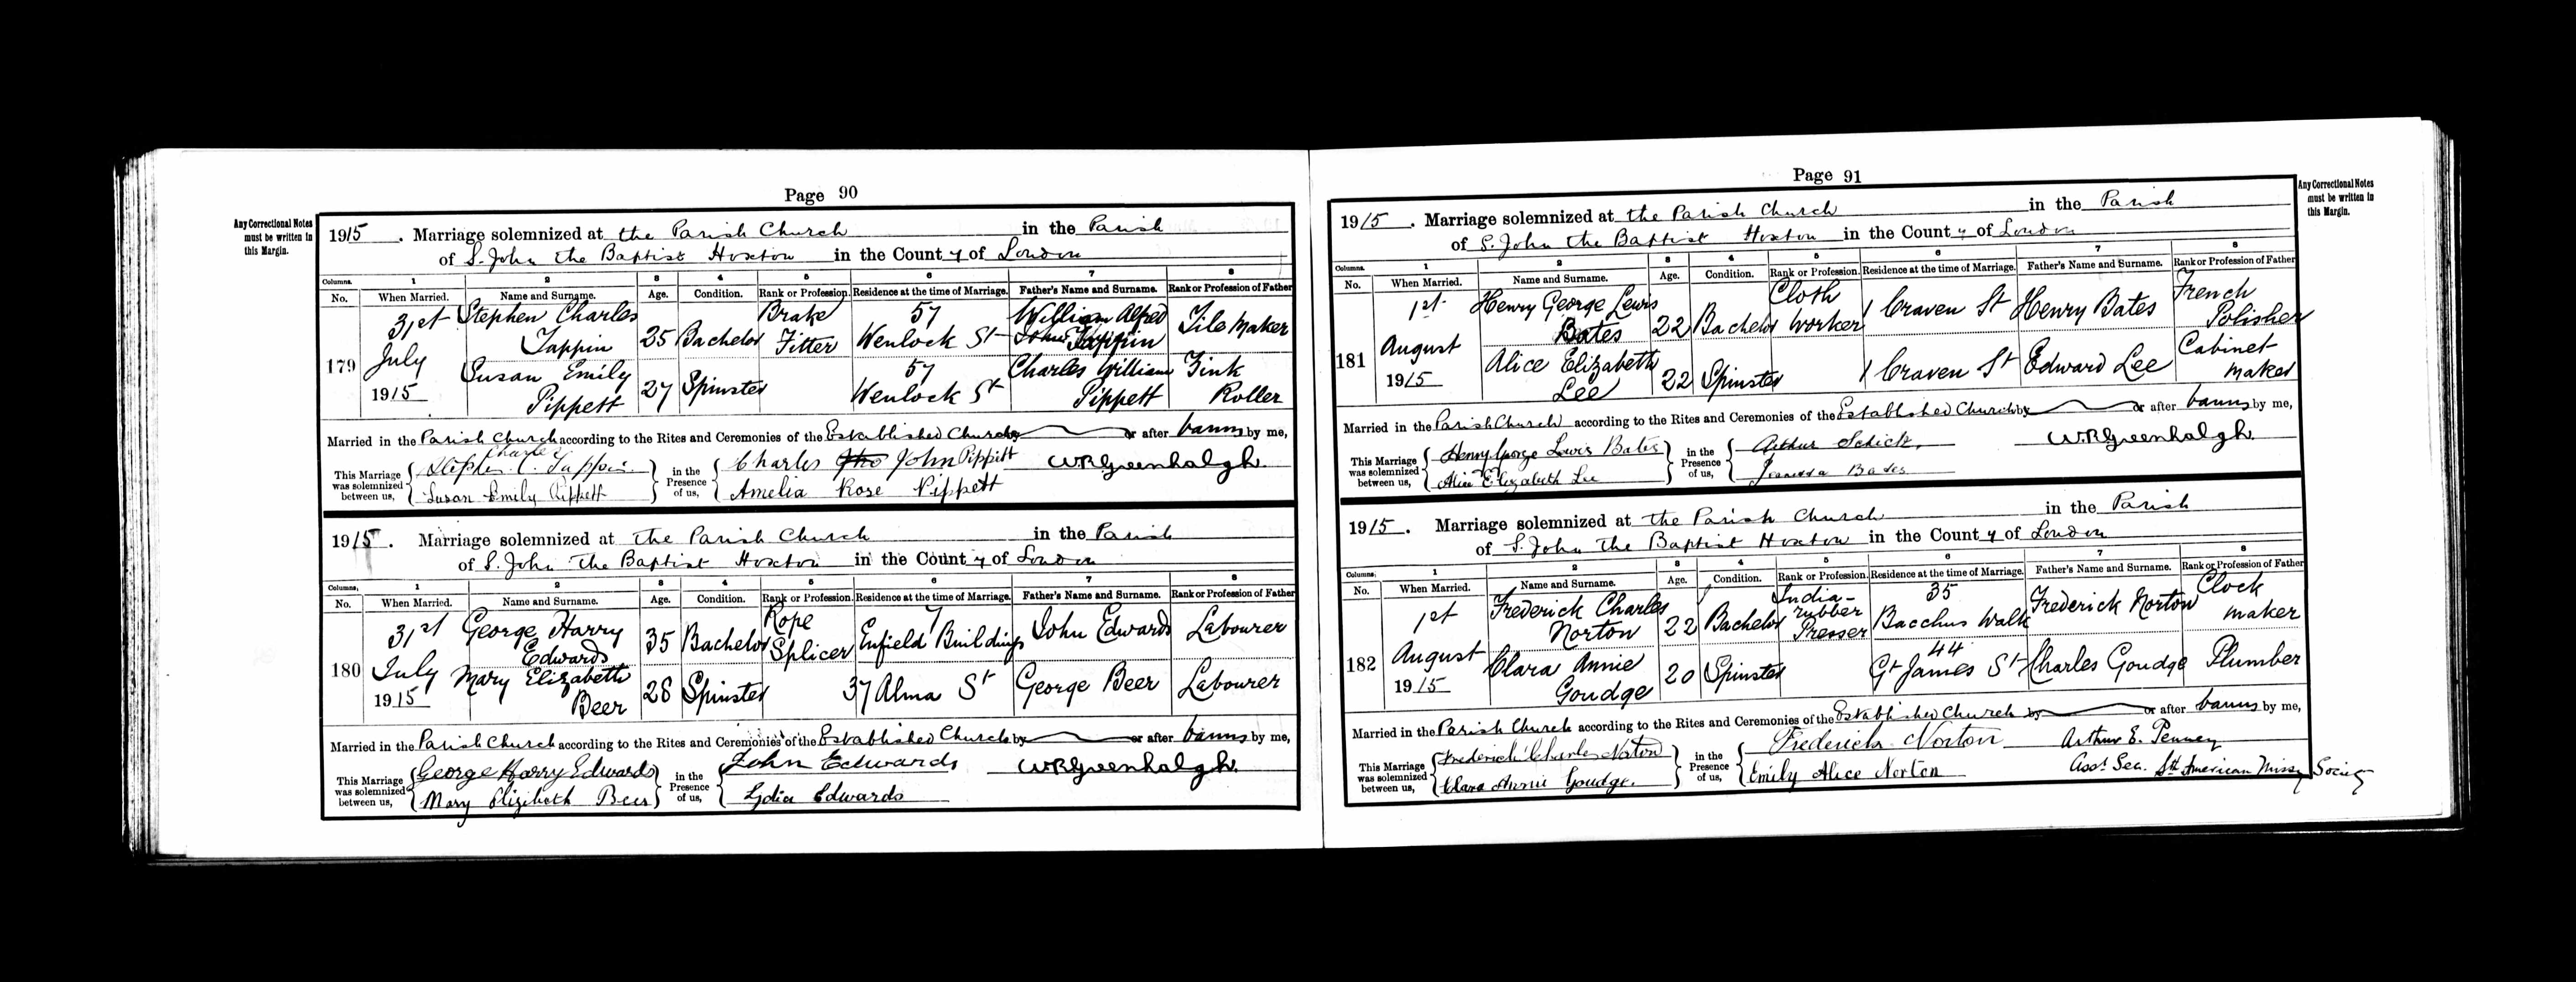 1915 marriage of Susan Emily Pippett to Stephen Charles Tappin